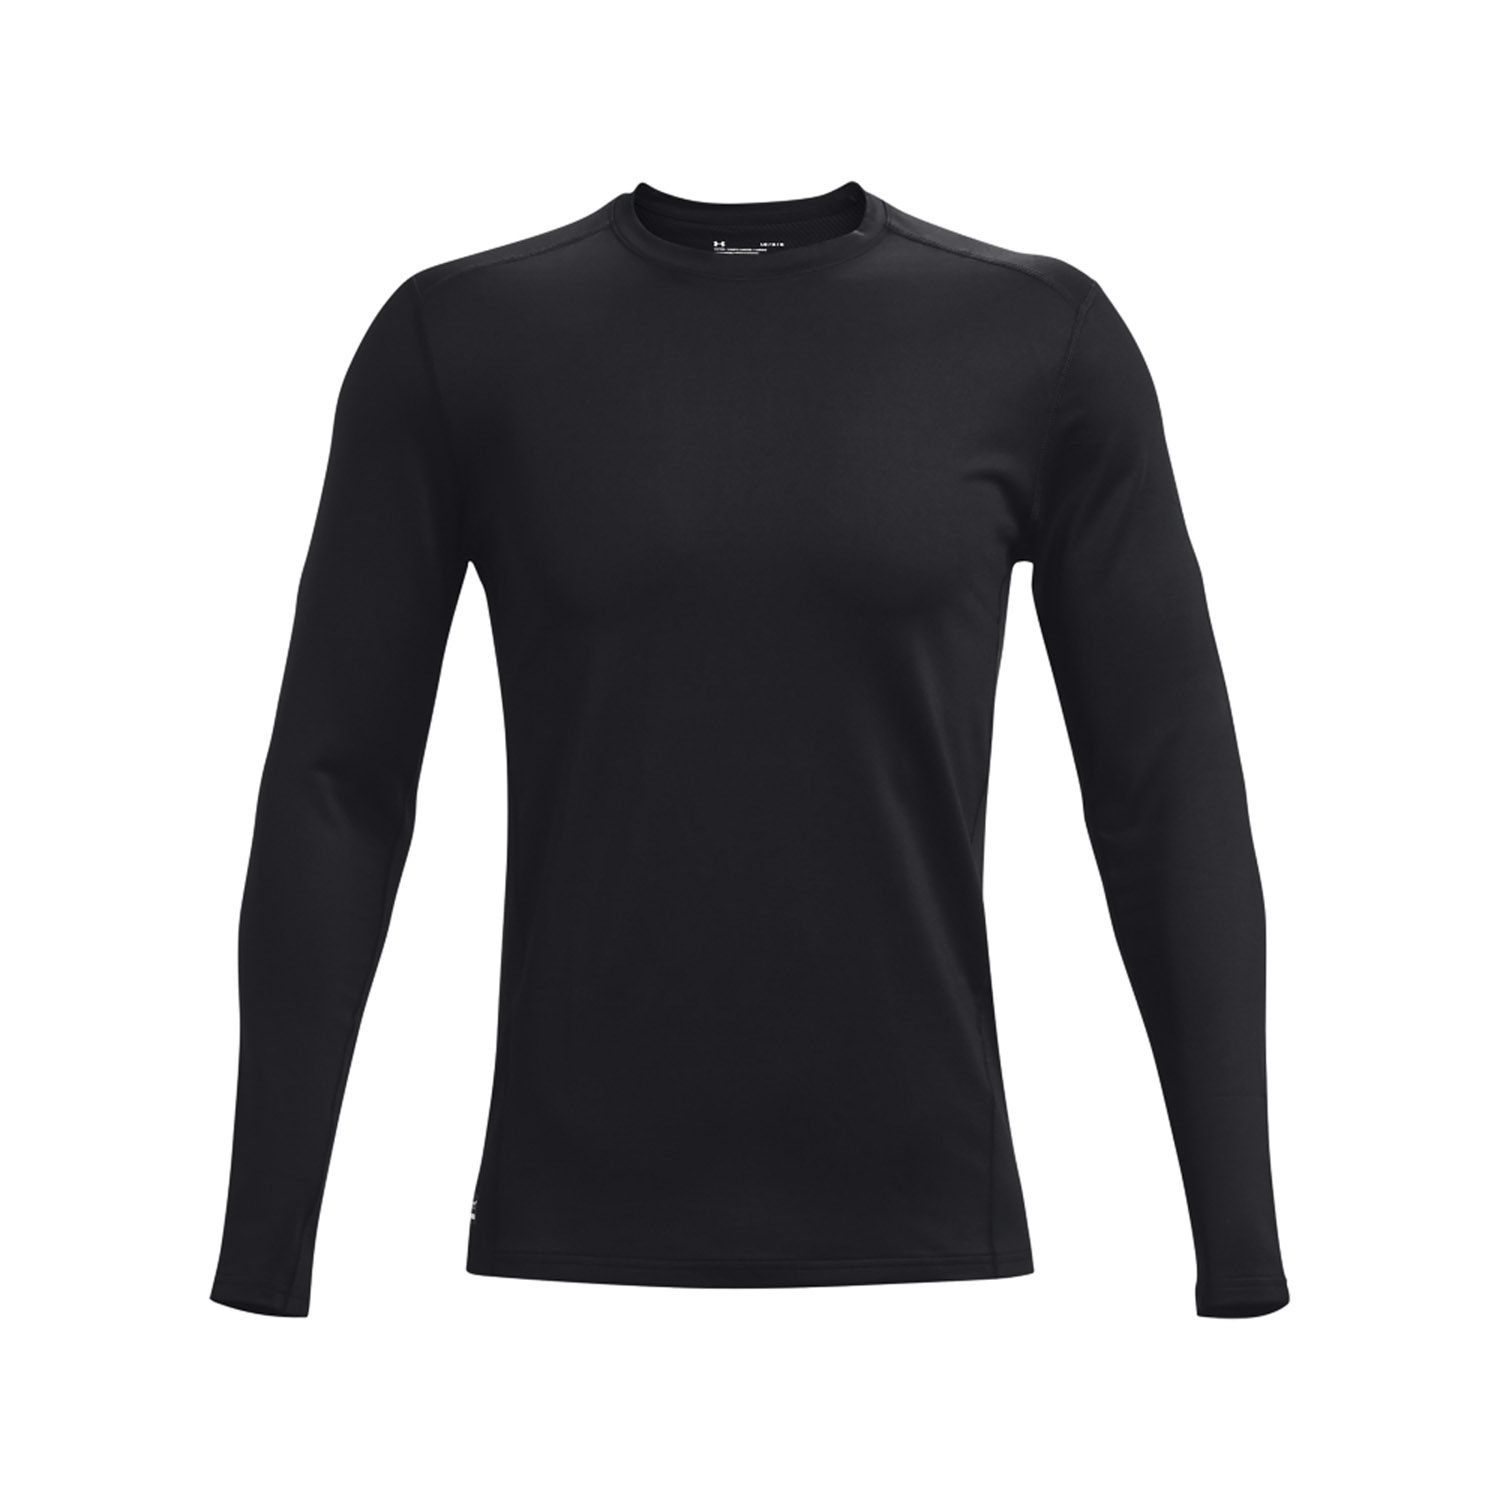 UNDER ARMOUR TACTICAL COLDGEAR INFRARED CREW BASE LAYER SHIR